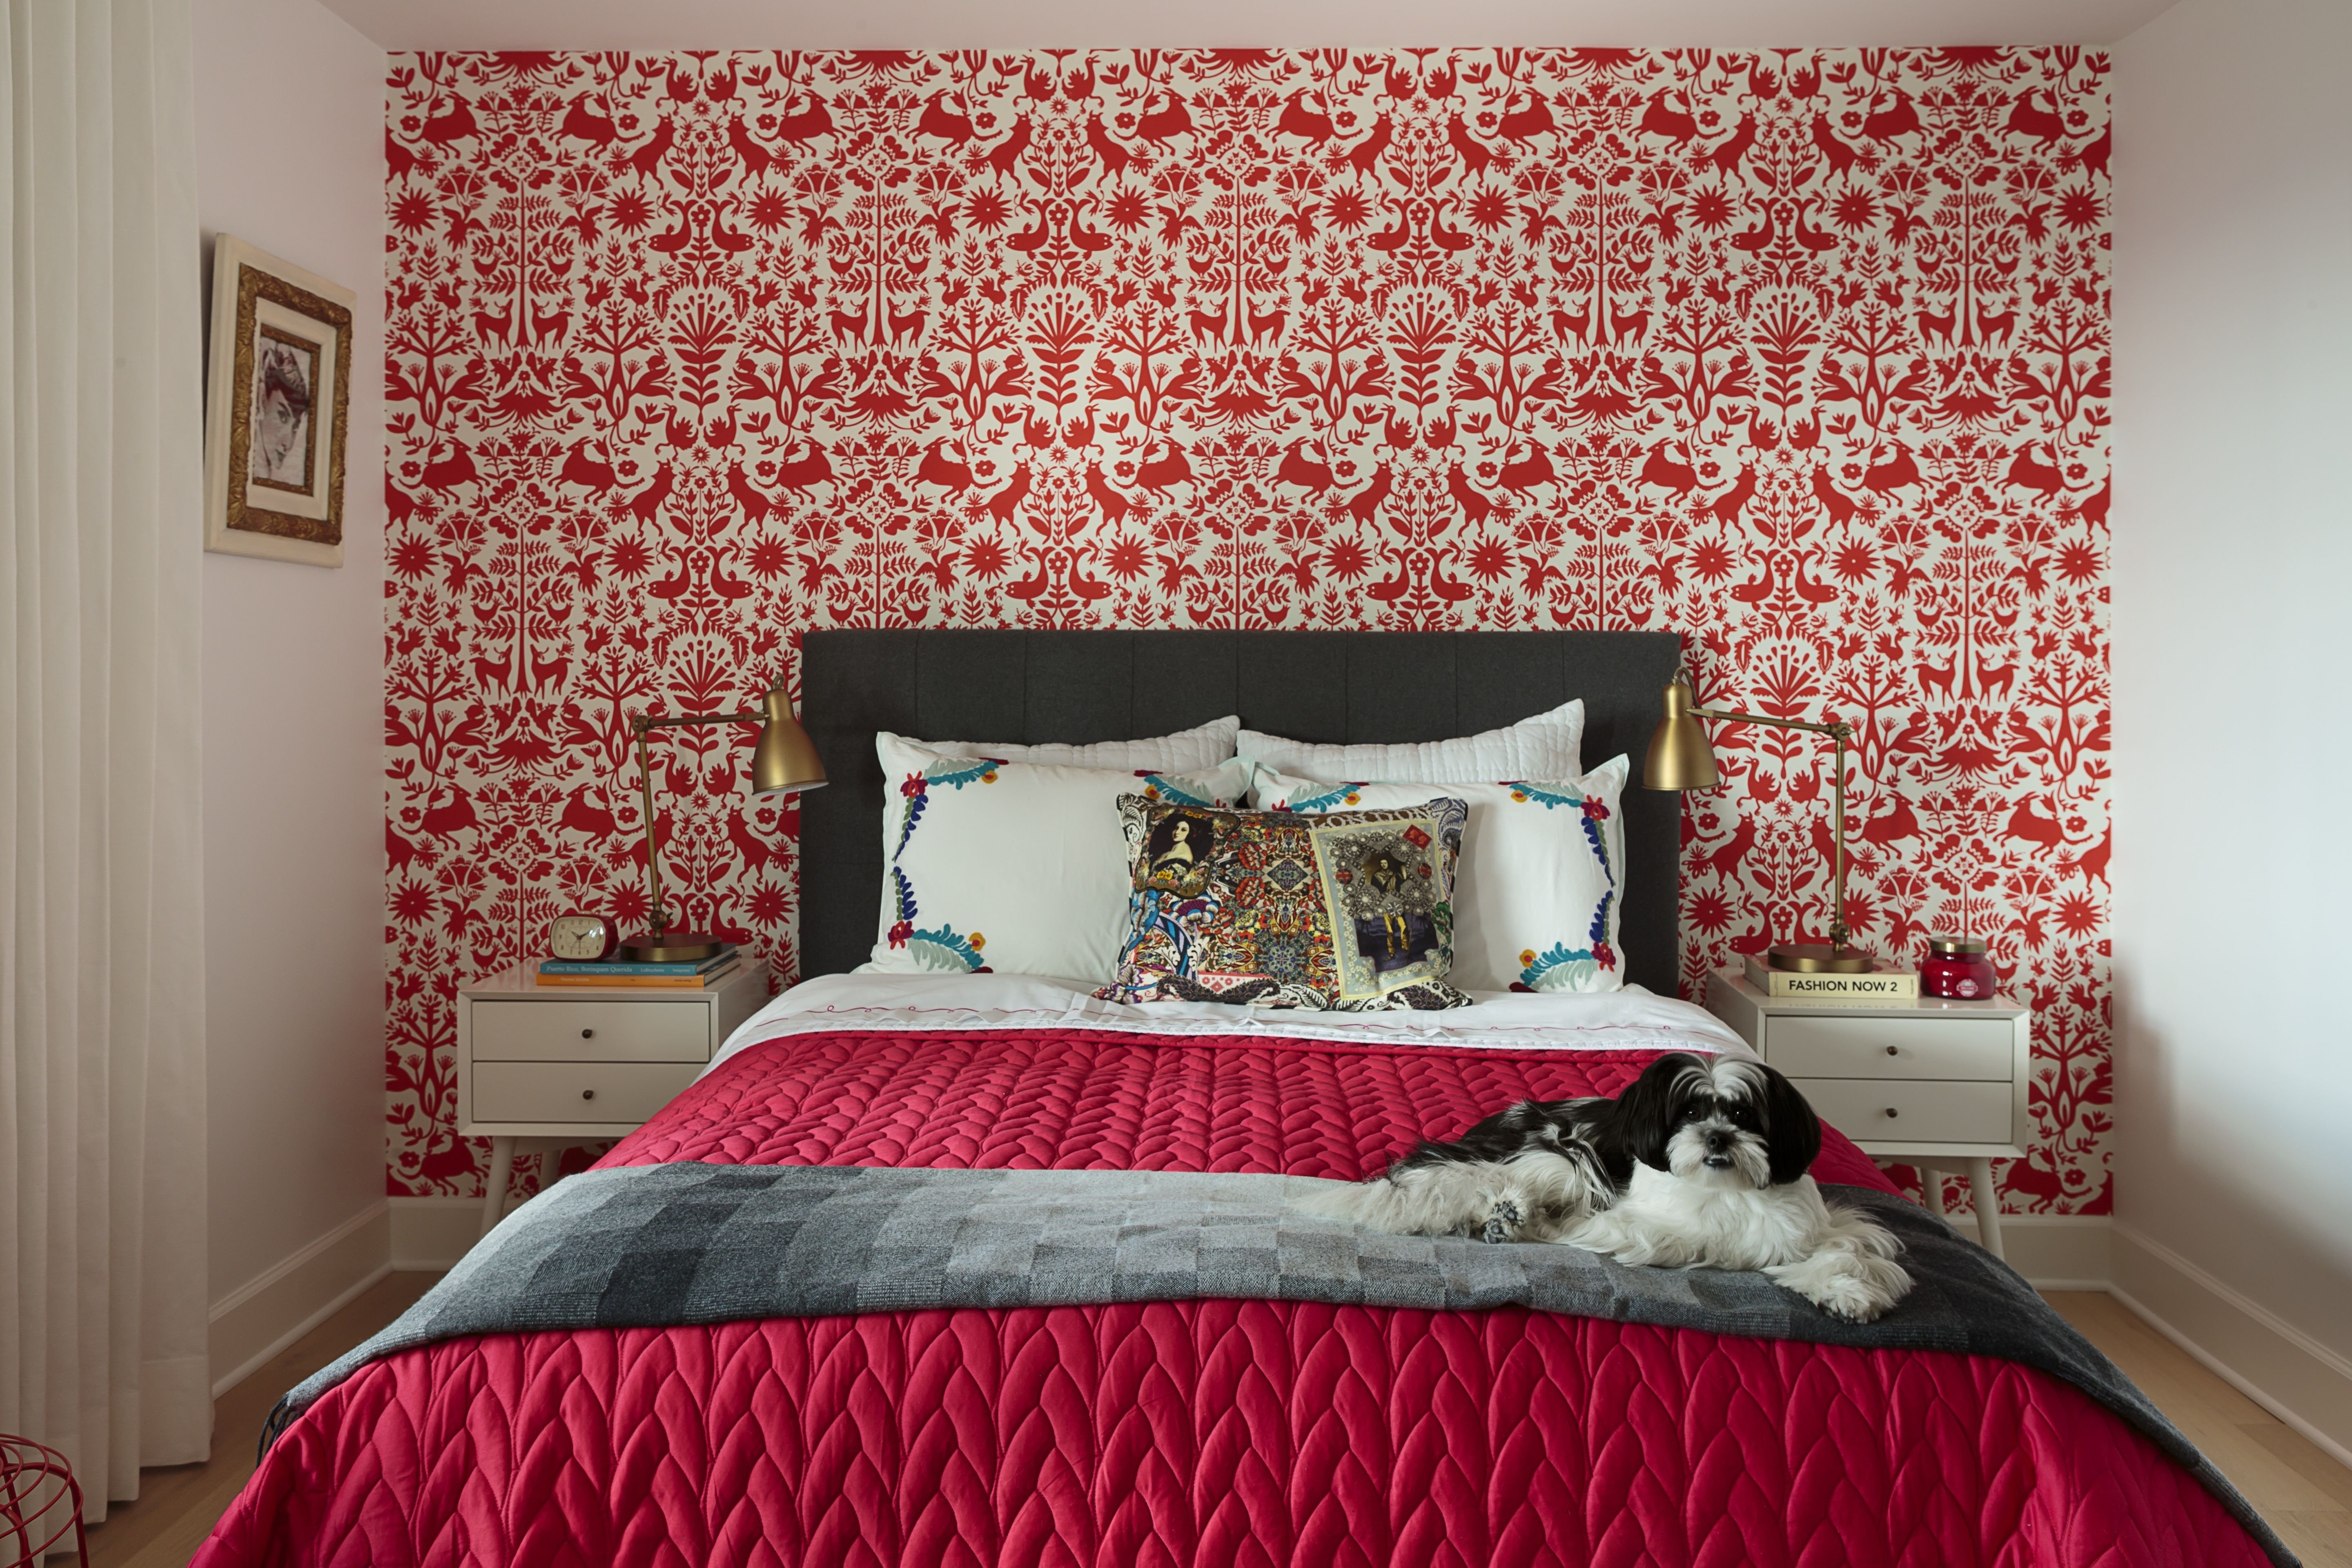 Wallpaper Accent Wall Bedroom Unique Pin On Lynne Paker Designs Hilltop House